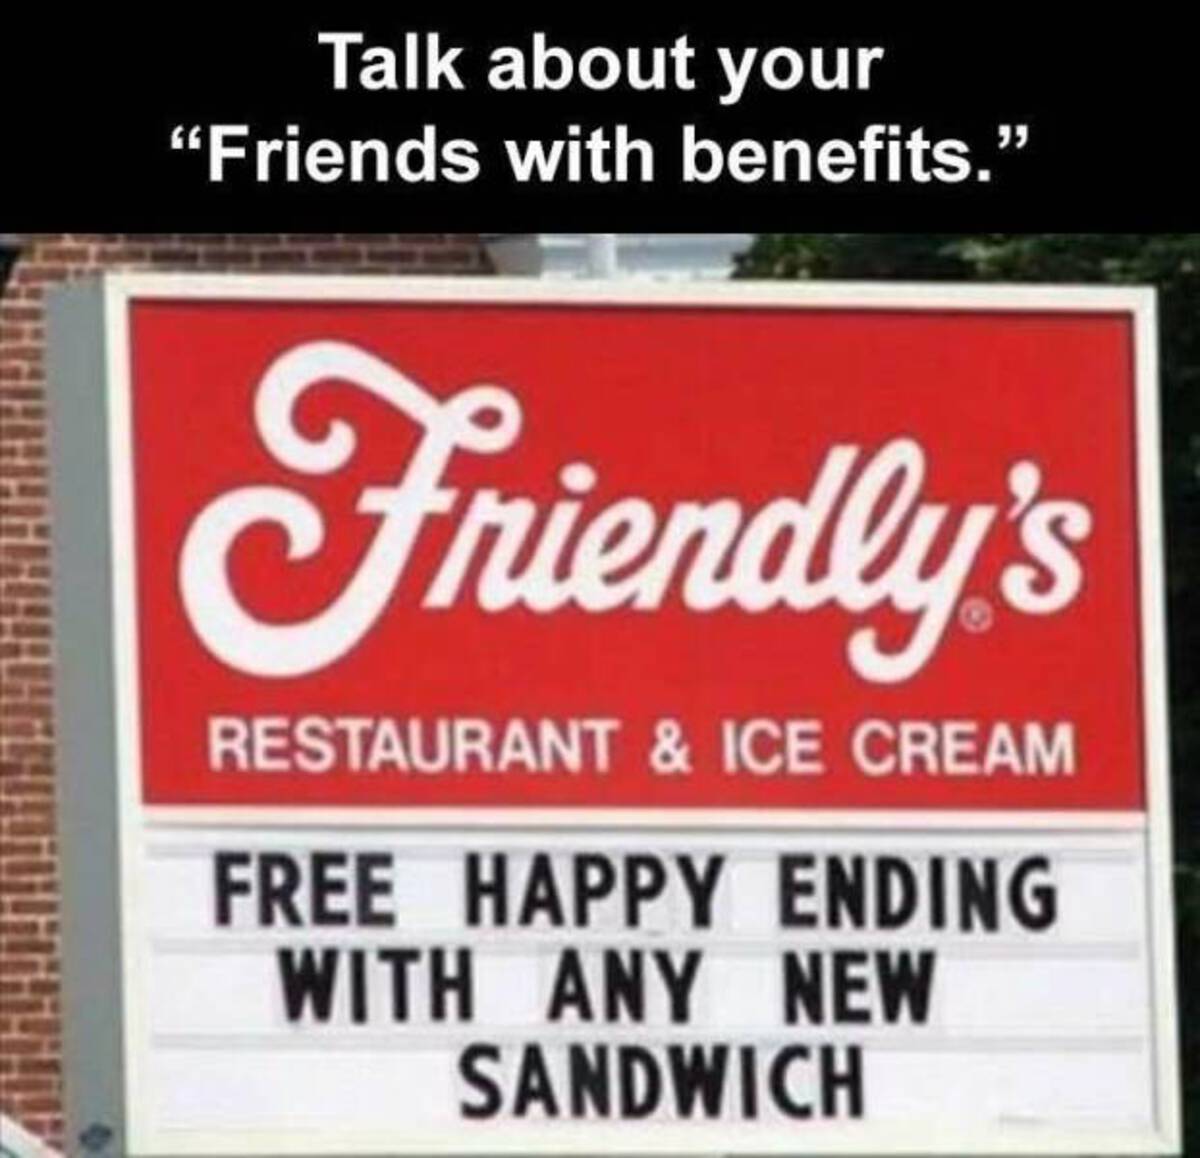 friendly's restaurant logo - Talk about your "Friends with benefits." Friendly's Restaurant & Ice Cream Free Happy Ending With Any New Sandwich